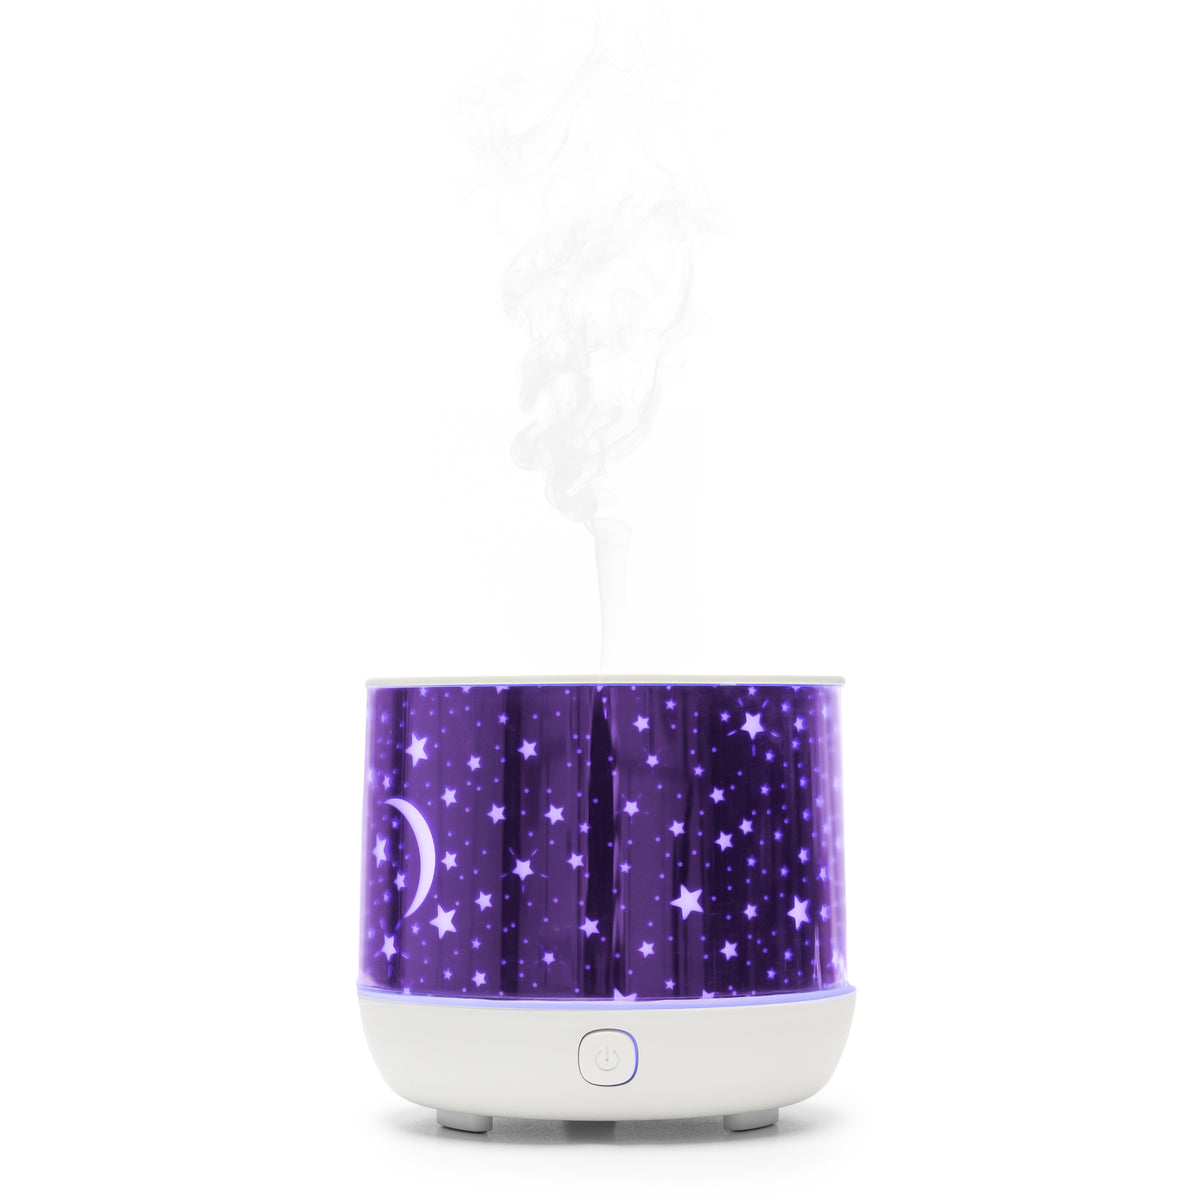 Dream Time Aroma Diffuser, Humidifier and Night Light